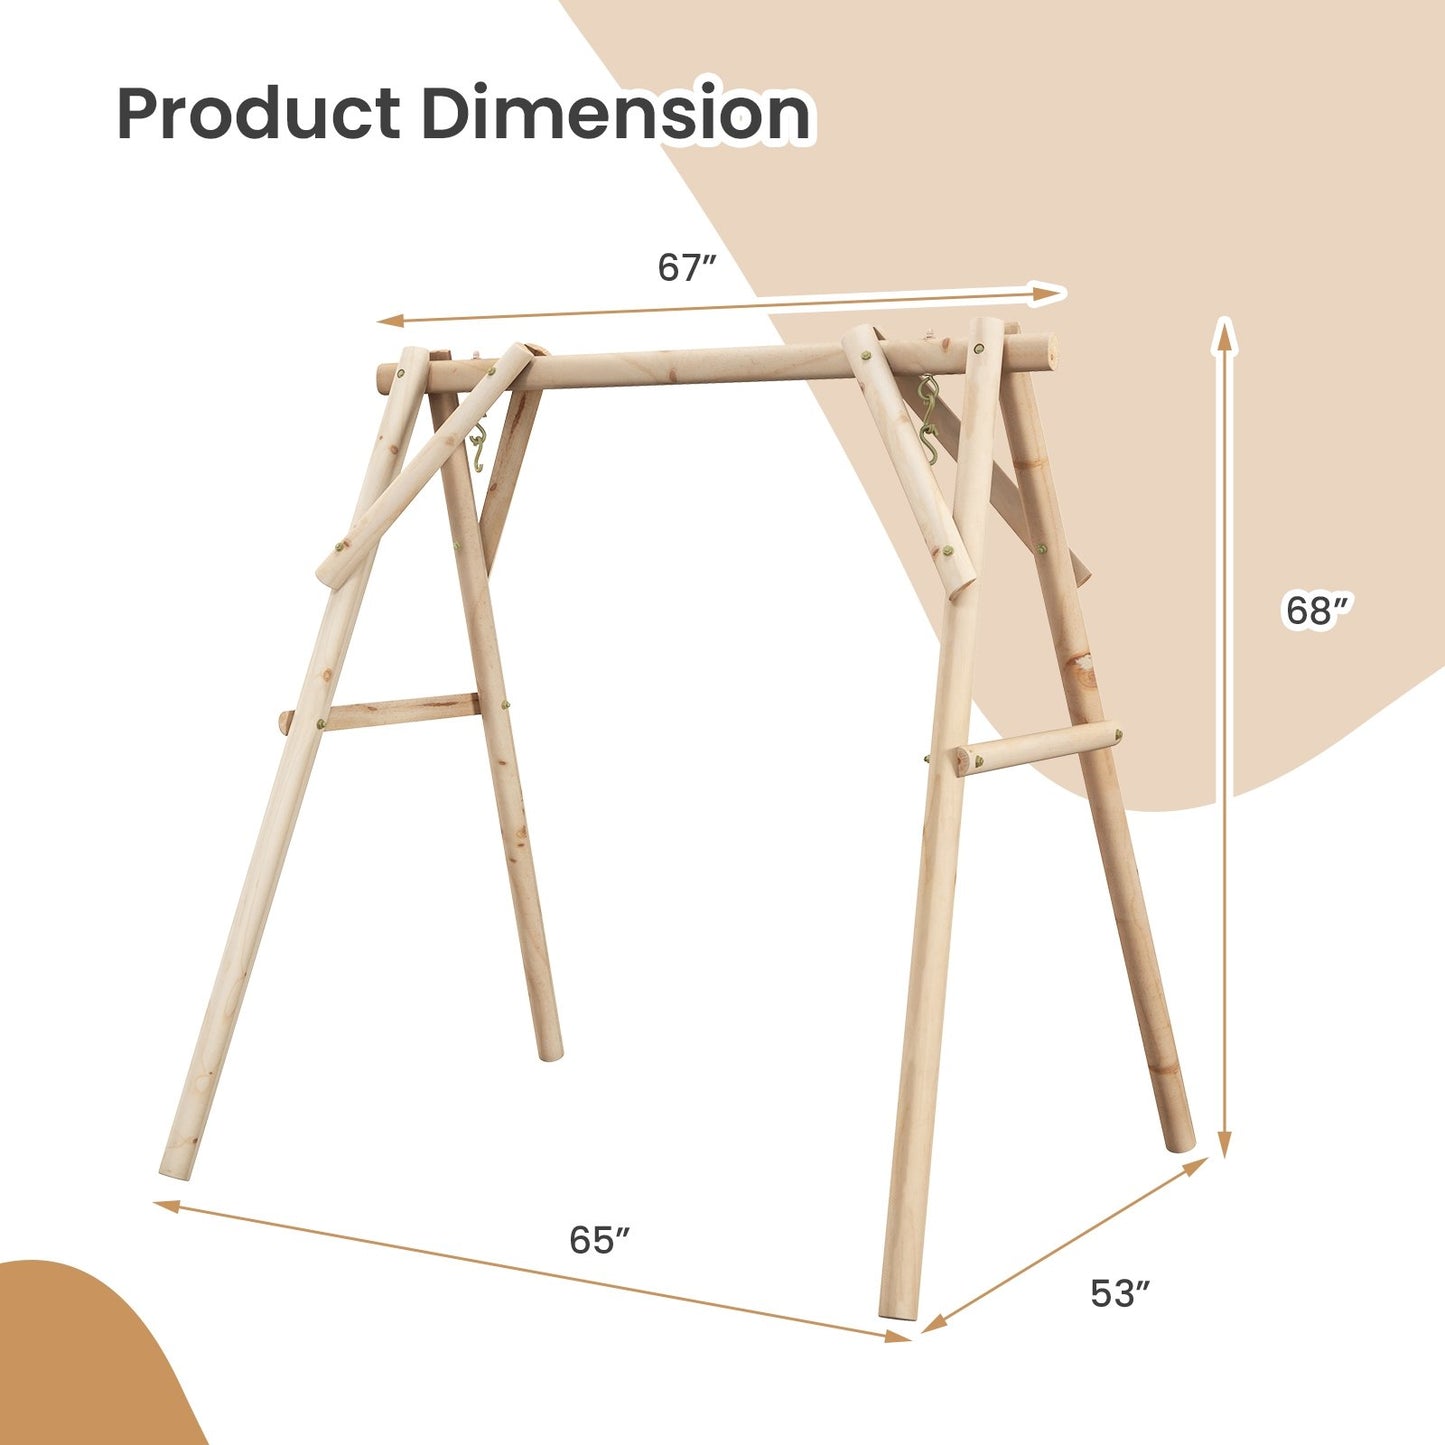 Heavy Duty Wooden Swing Frame with Reinforced Bars, Natural